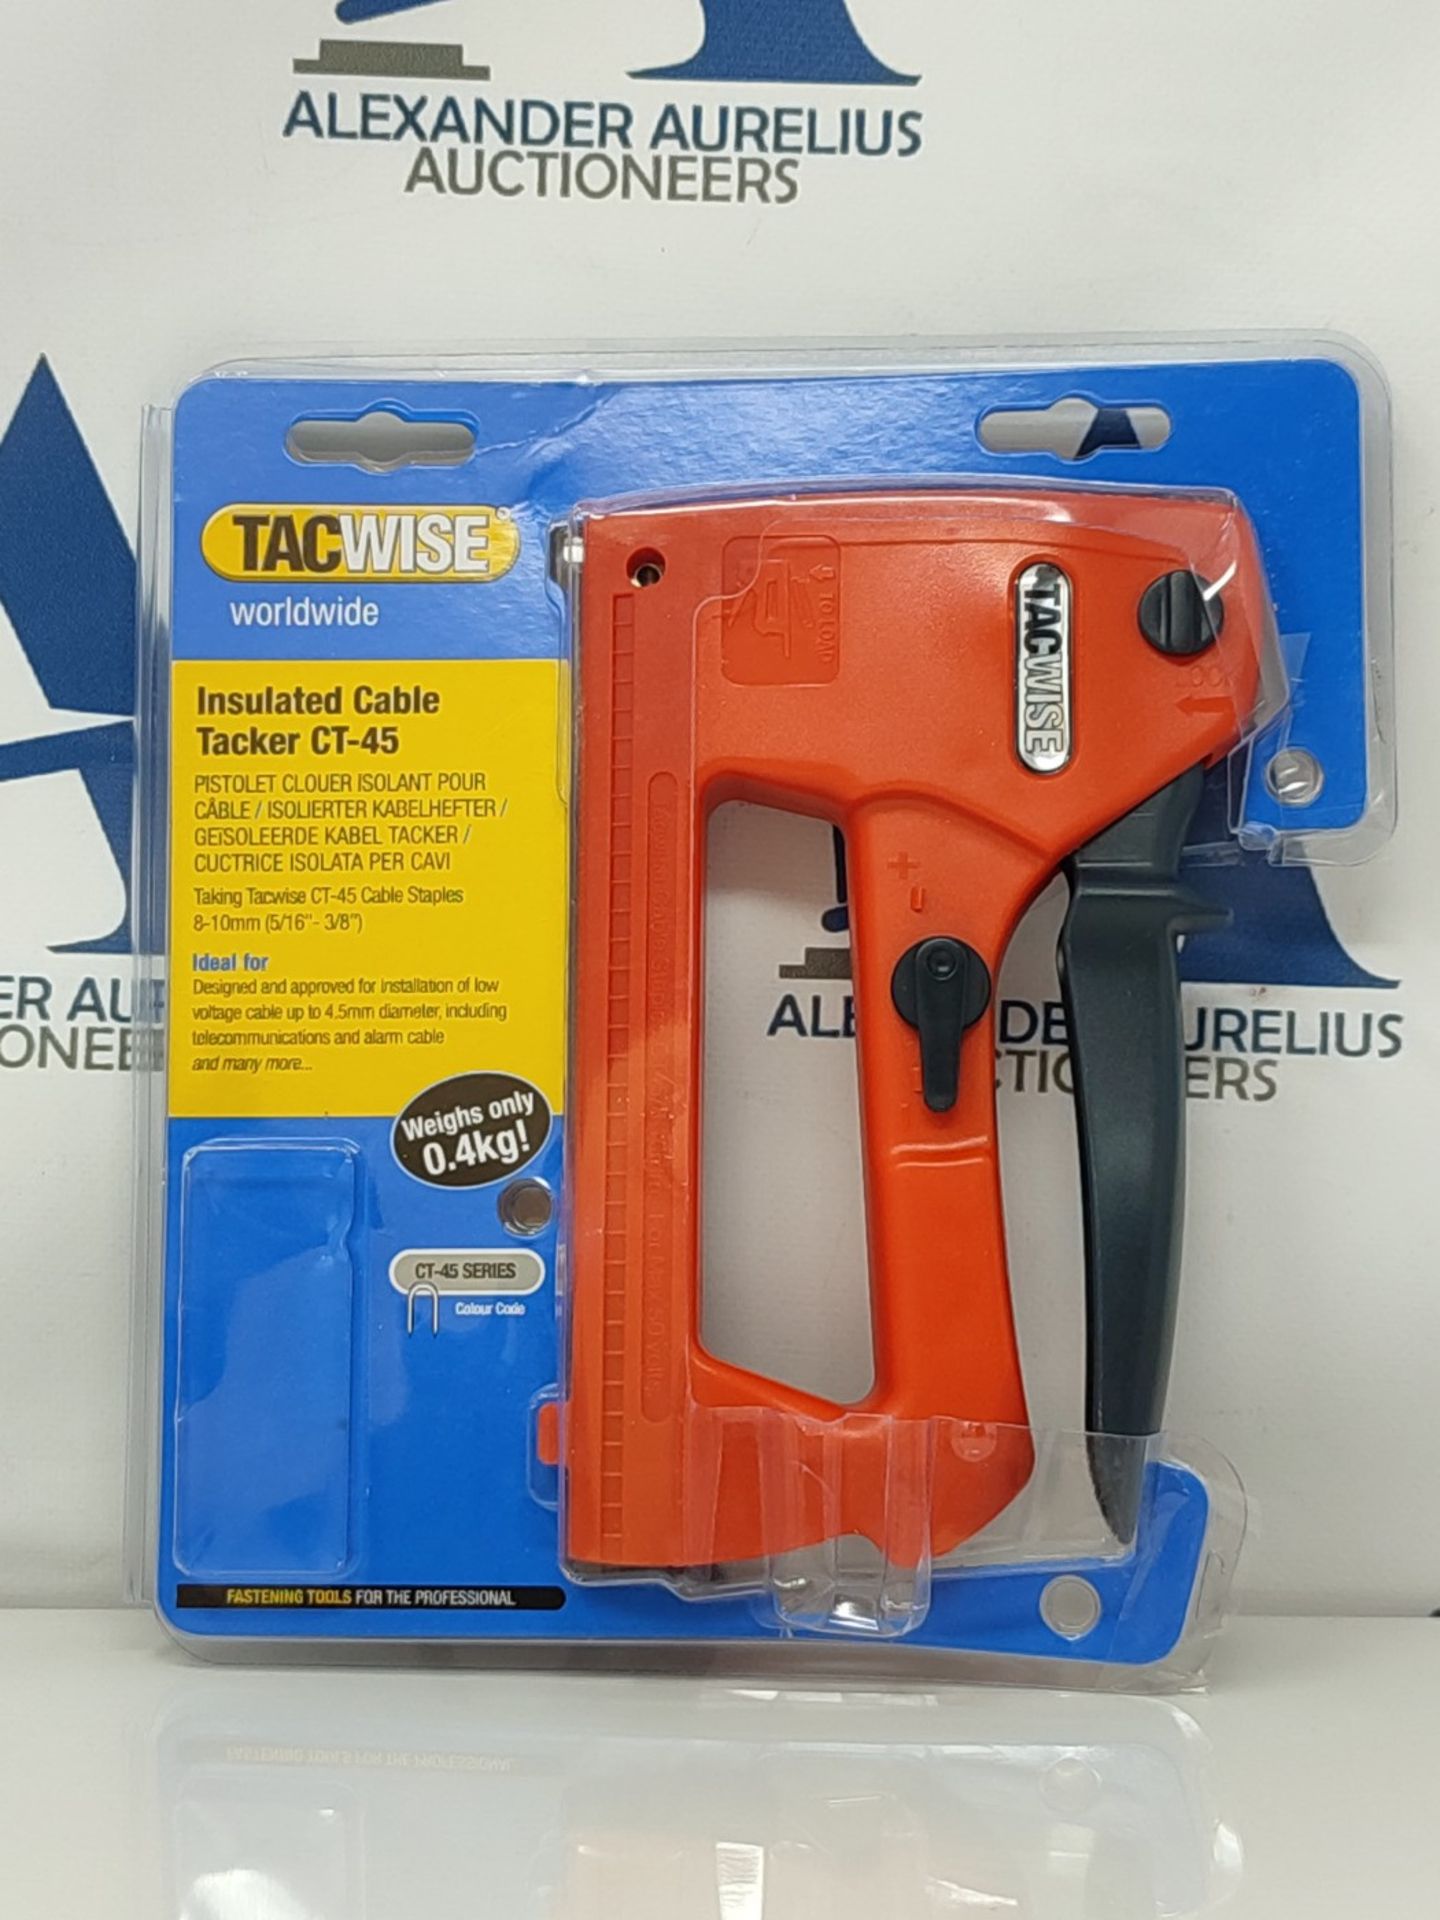 Tacwise 0320 CT-45 Cable Tacker, Uses Type CT-45 / 8 - 10 mm Staples - Image 3 of 3